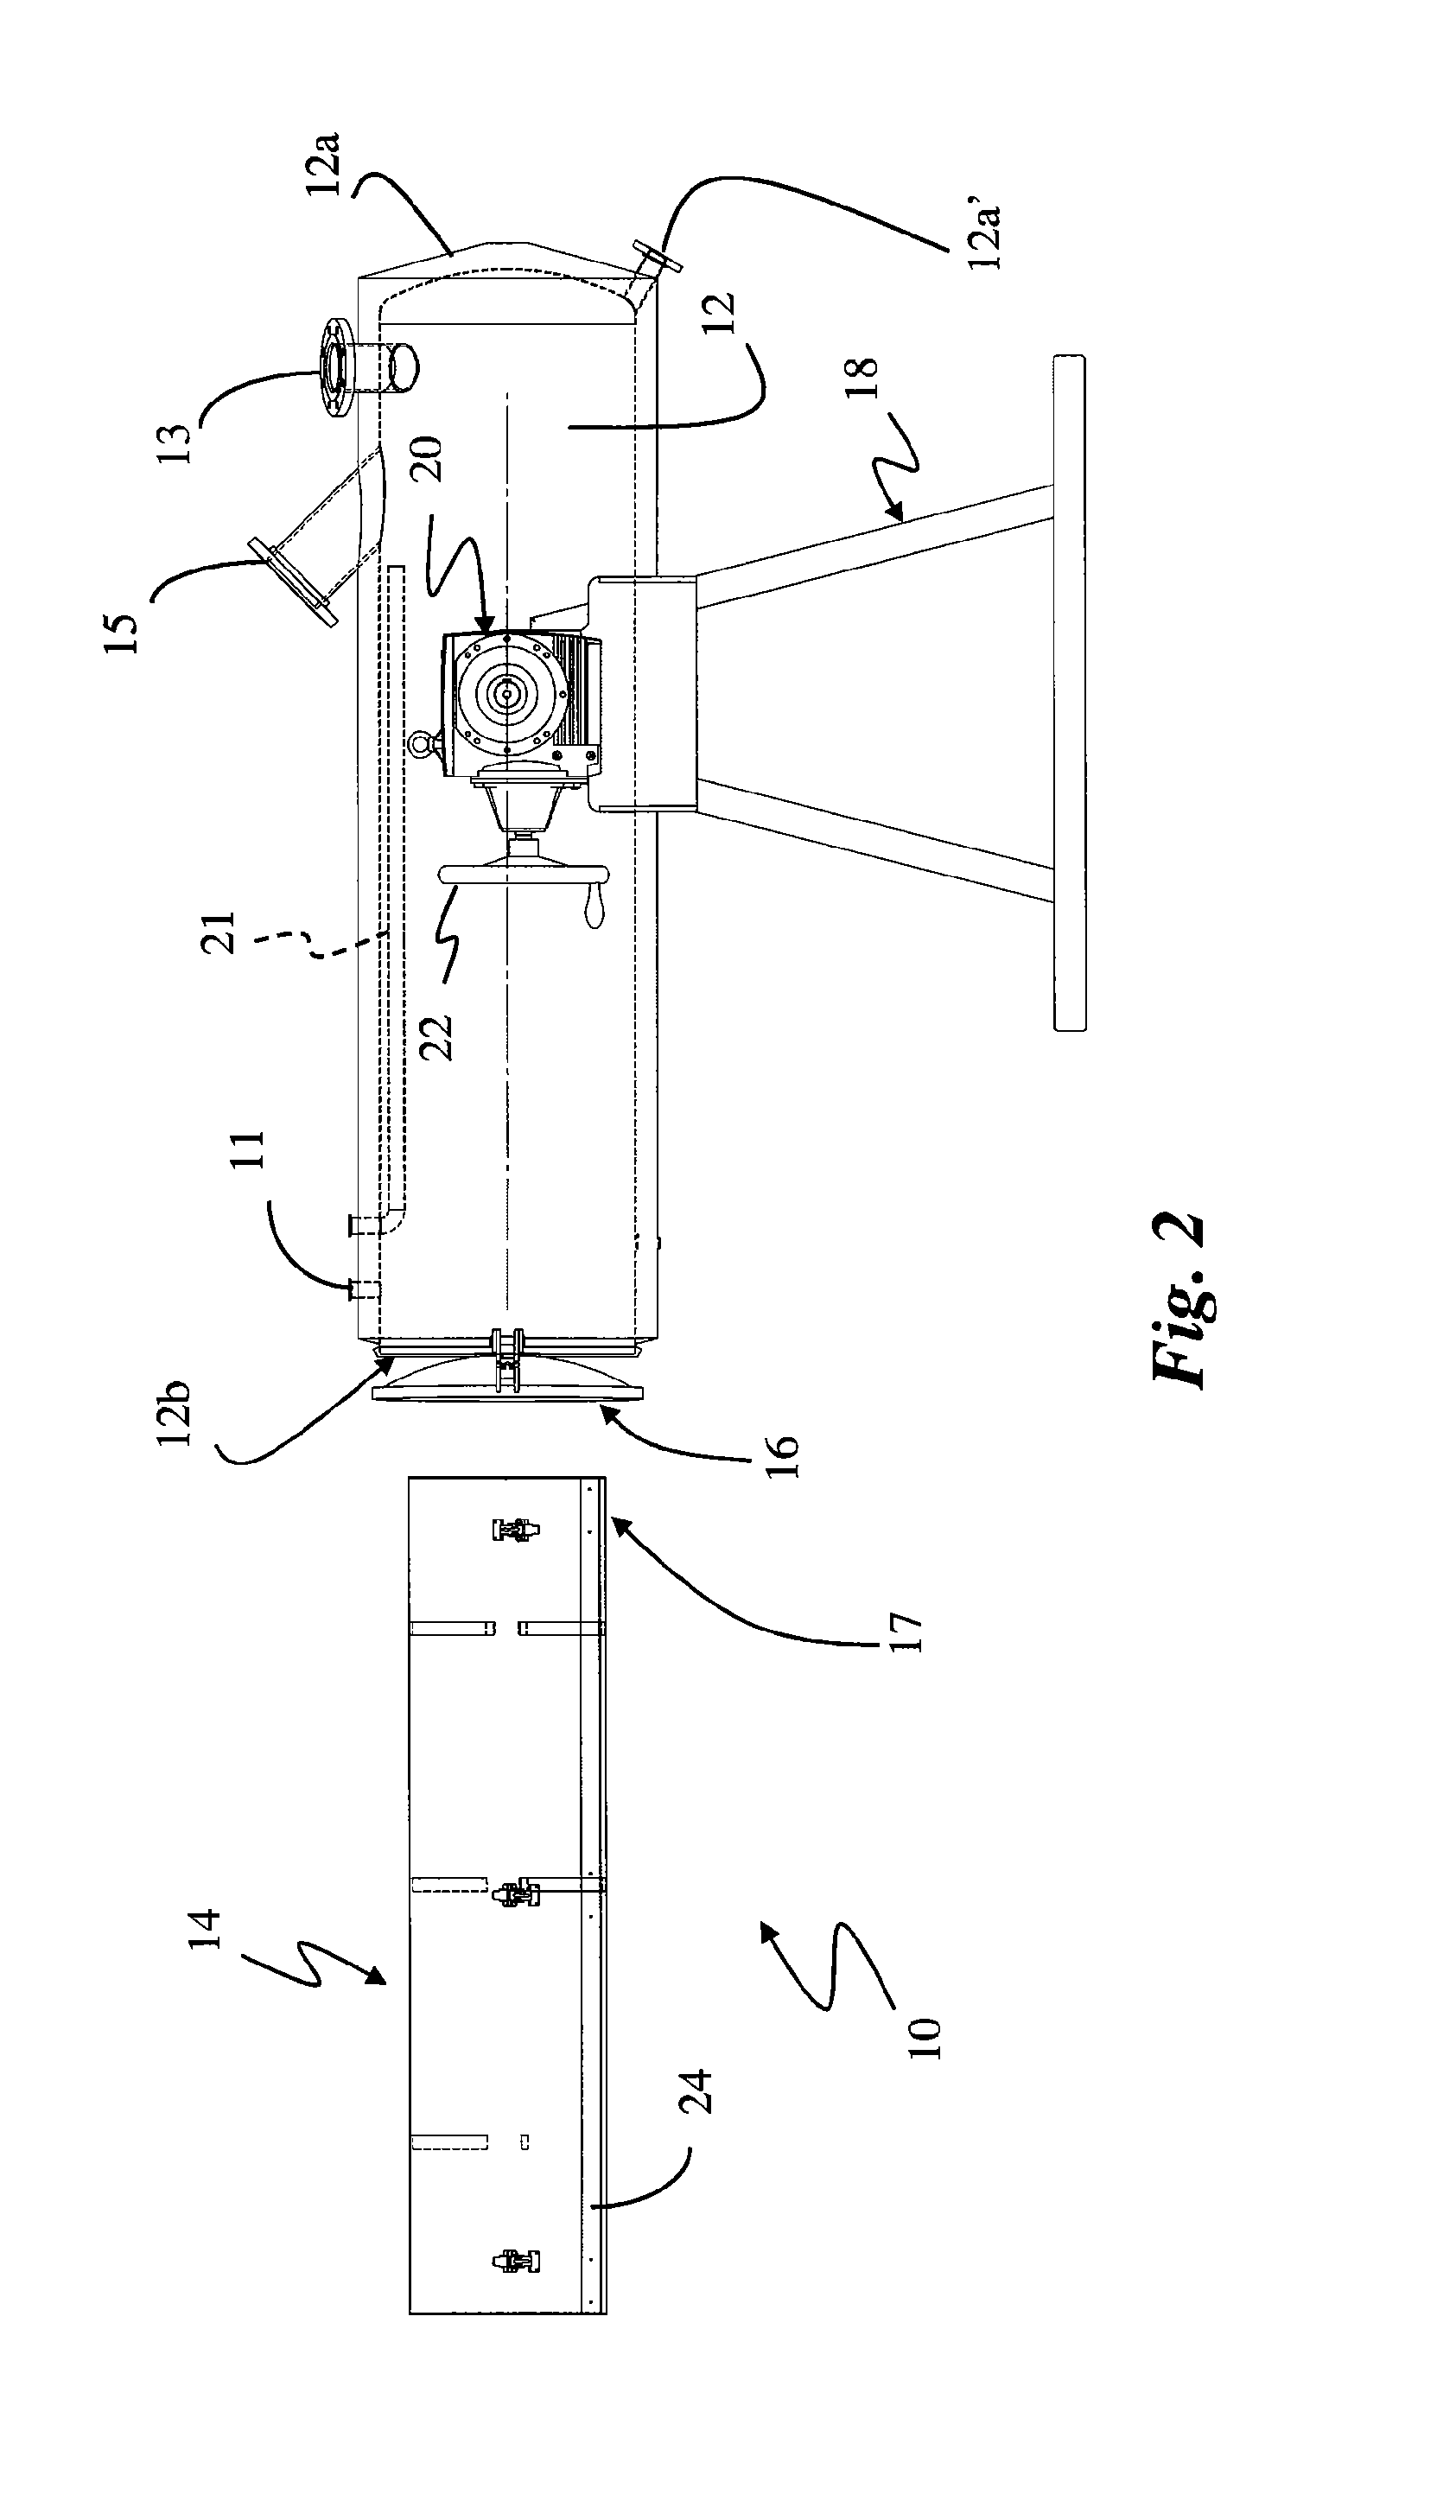 Tissue digestion method and apparatus